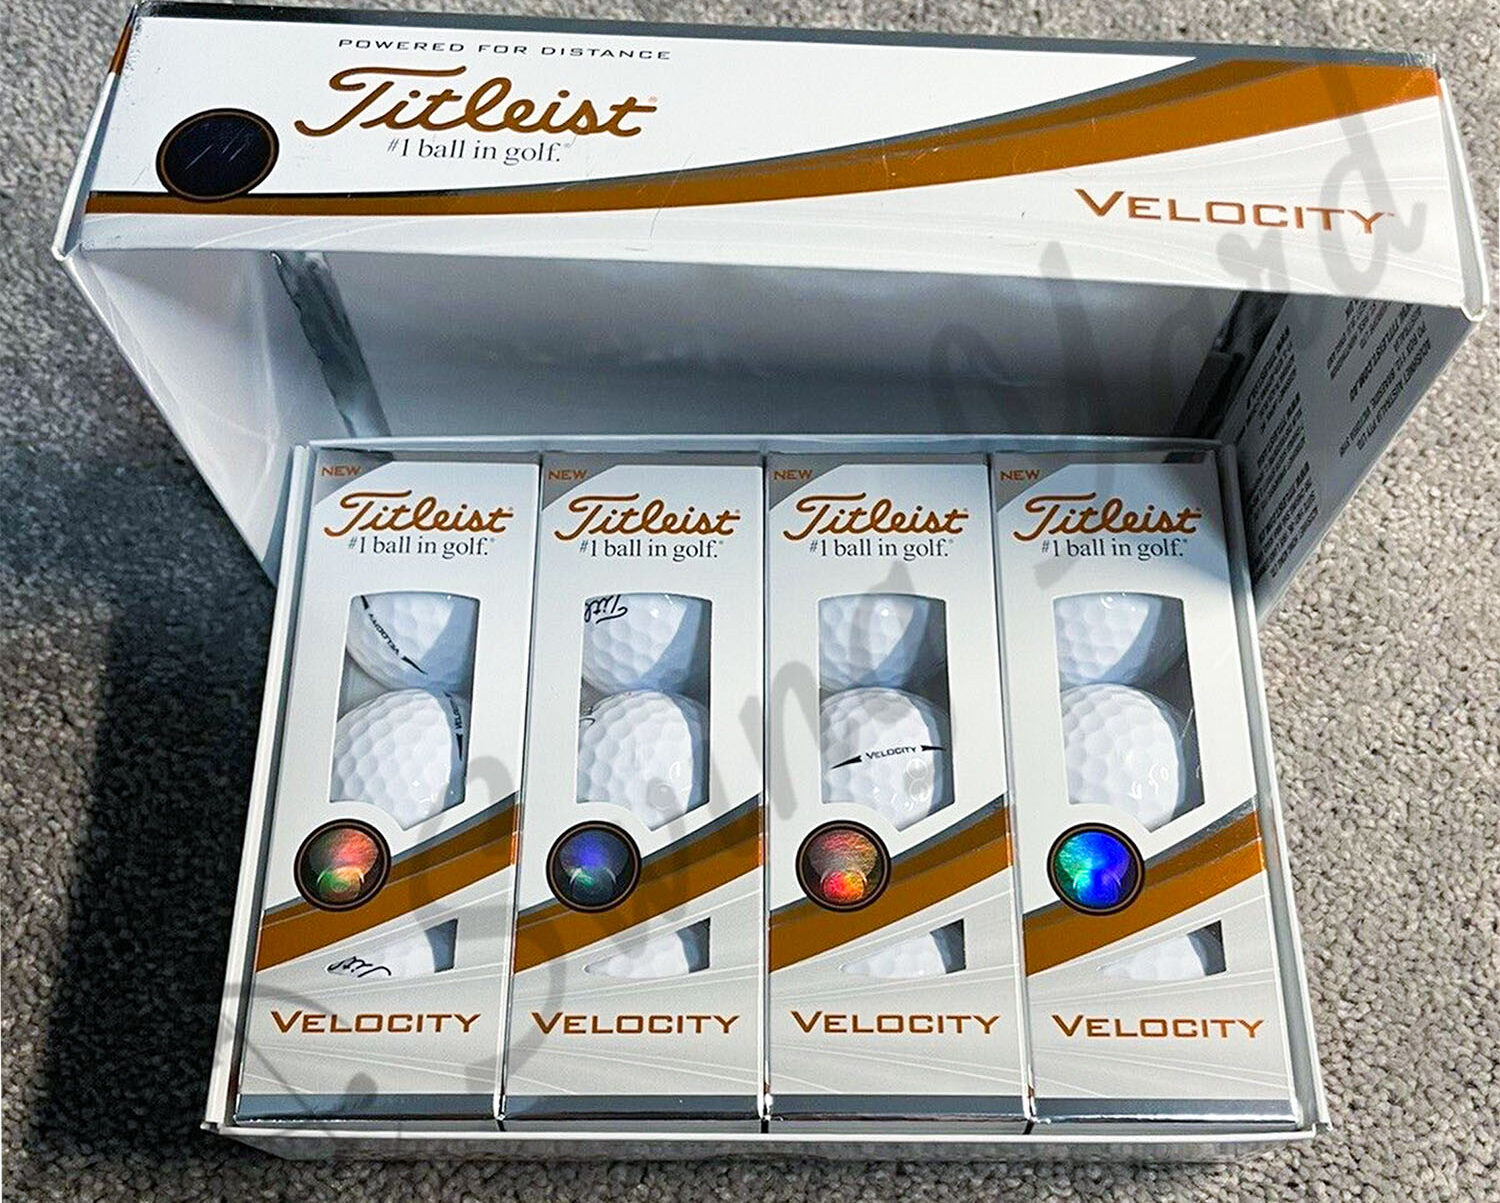 A Titleist Velocity box in the living room